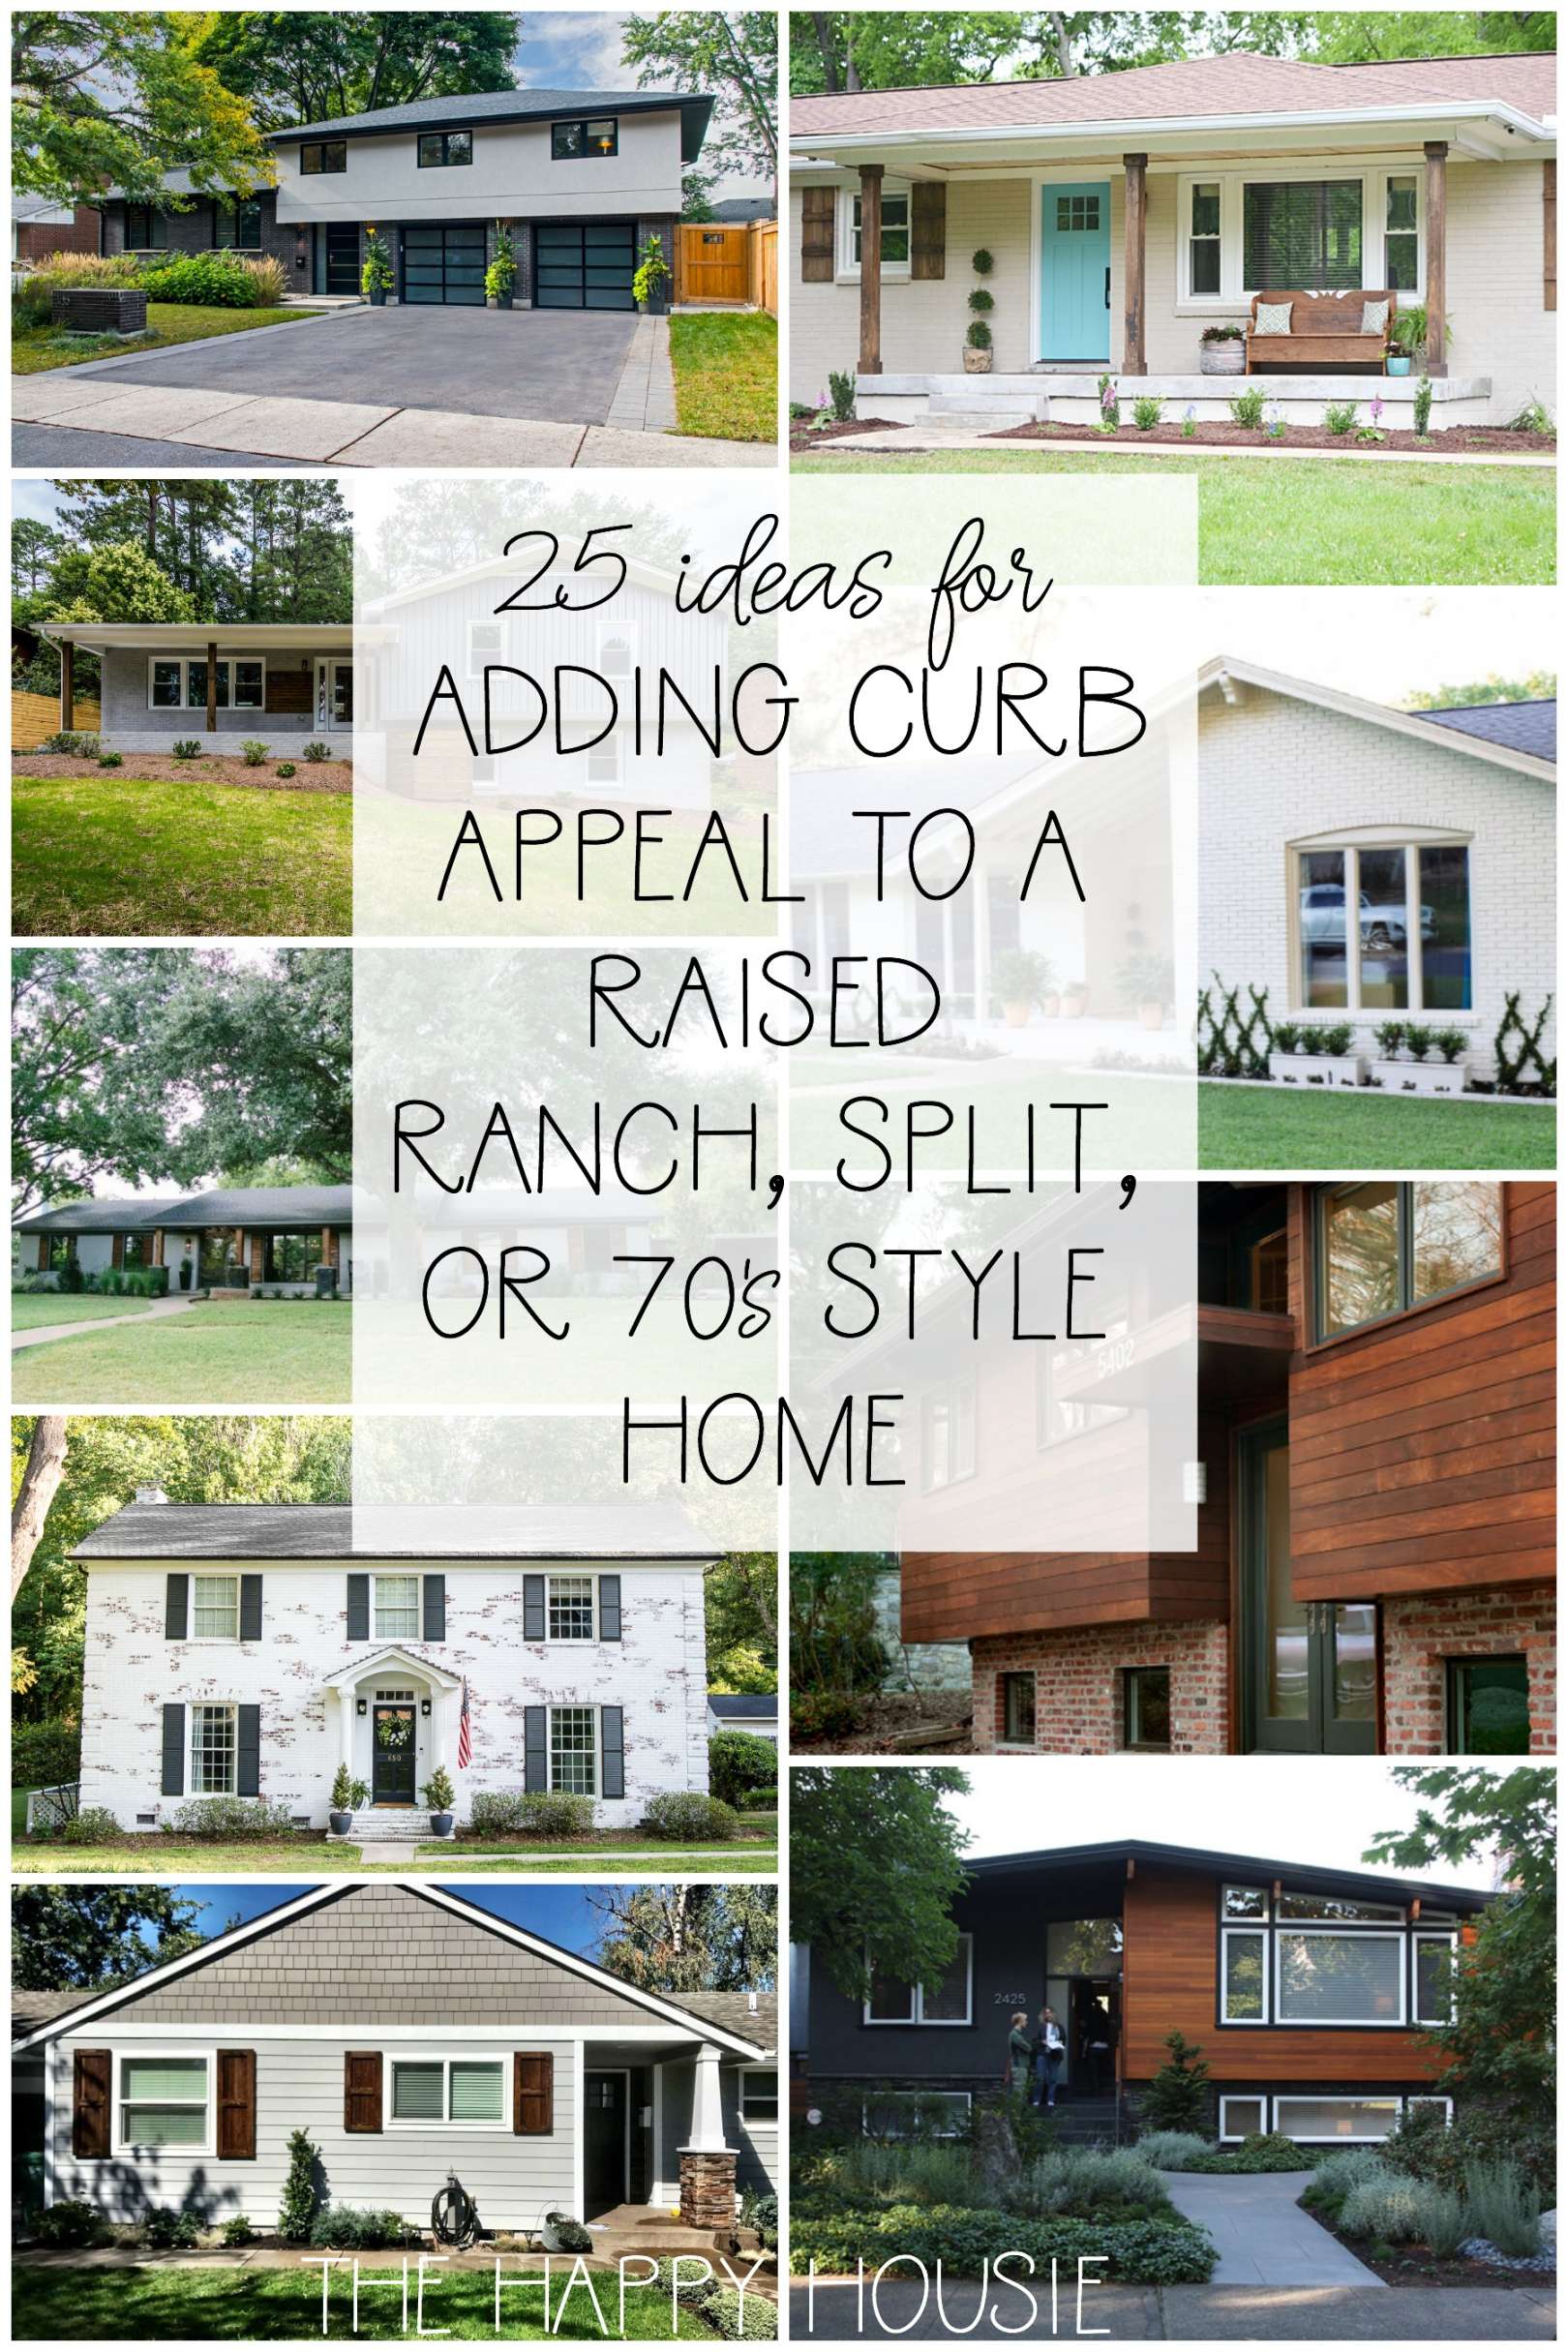 Ideas & Tips for Adding Curb Appeal to Your Home  The Happy Housie